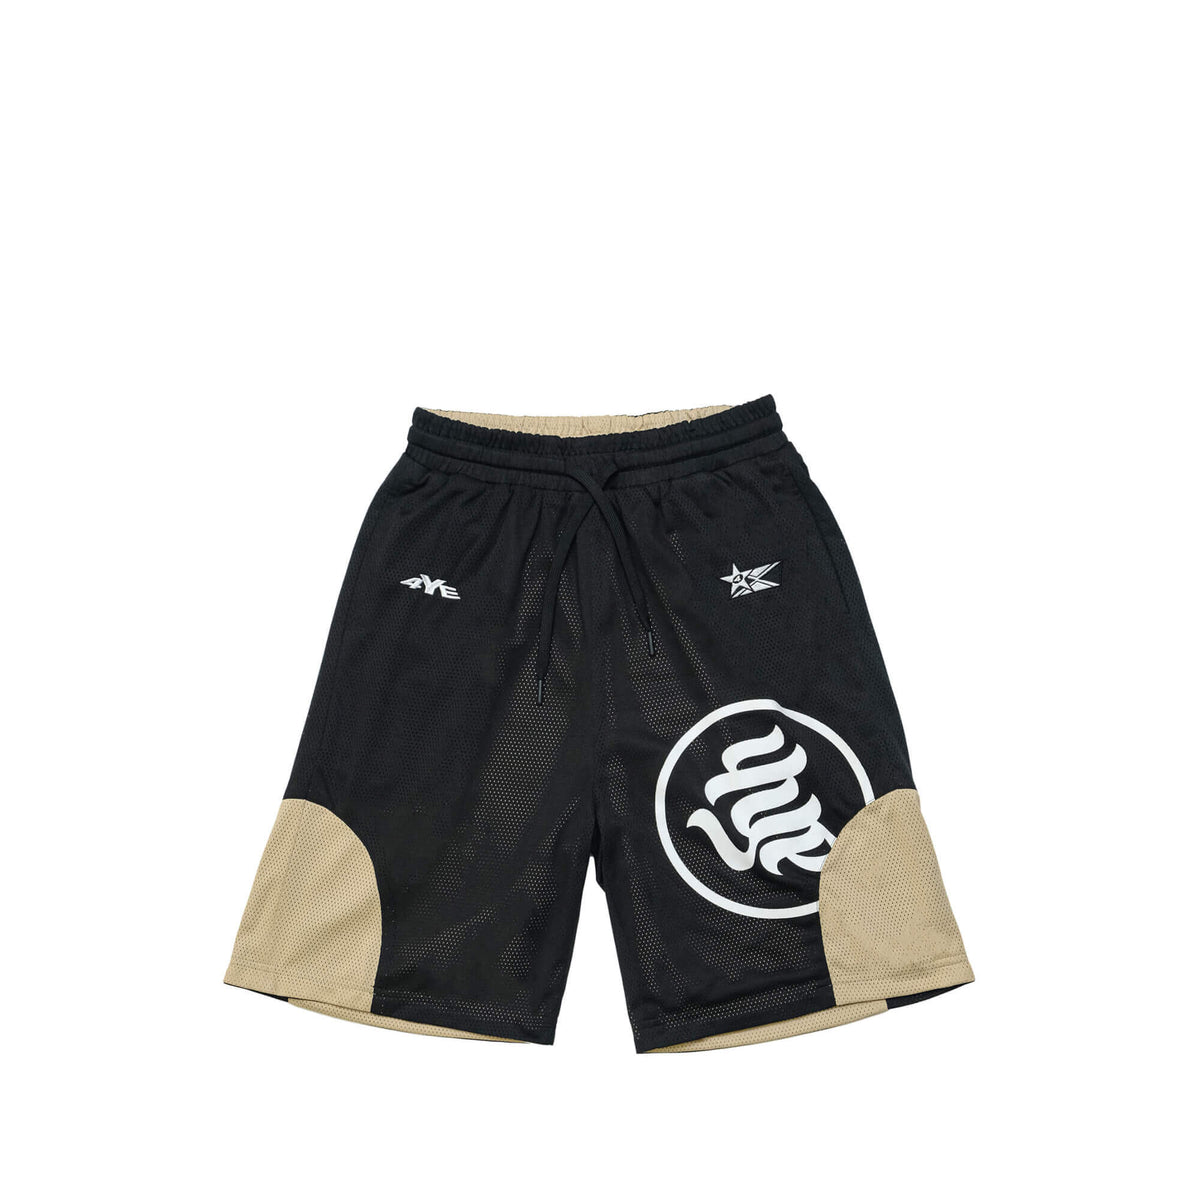 Front view of the black side of the reversible mesh short. Black side sports 3D printed 4ye signature, and 4ye reggae logos, as well as screenprinted 4YE logo on left leg. 